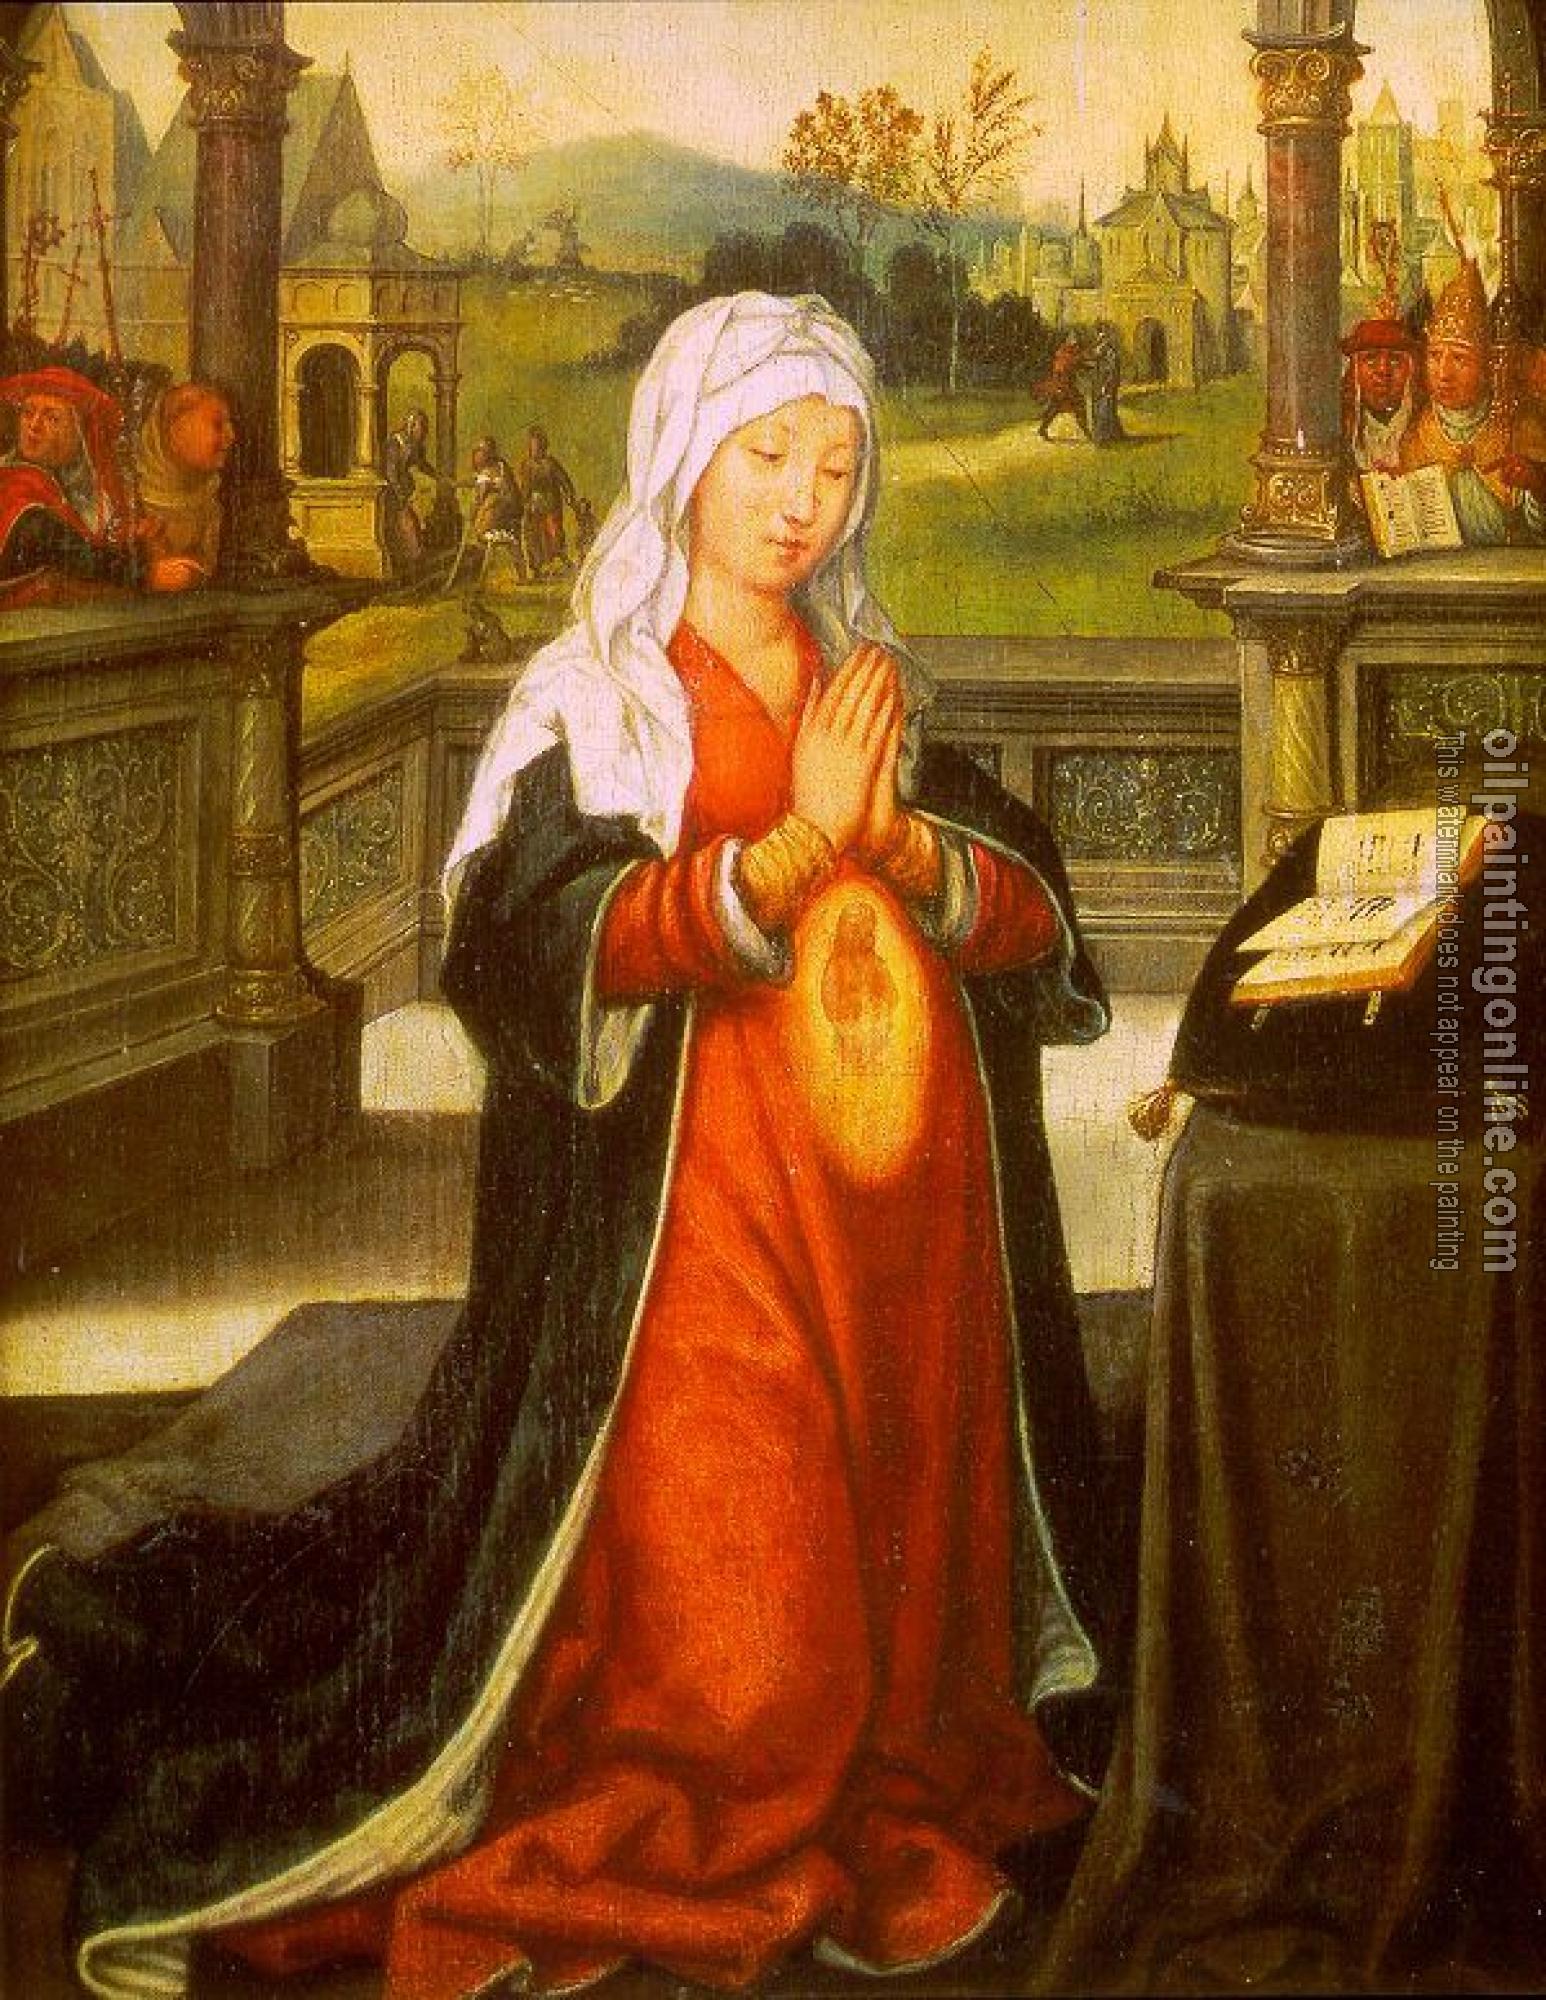 Bellegambe, Jean - St. Anne Conceiving the Virgin Mary